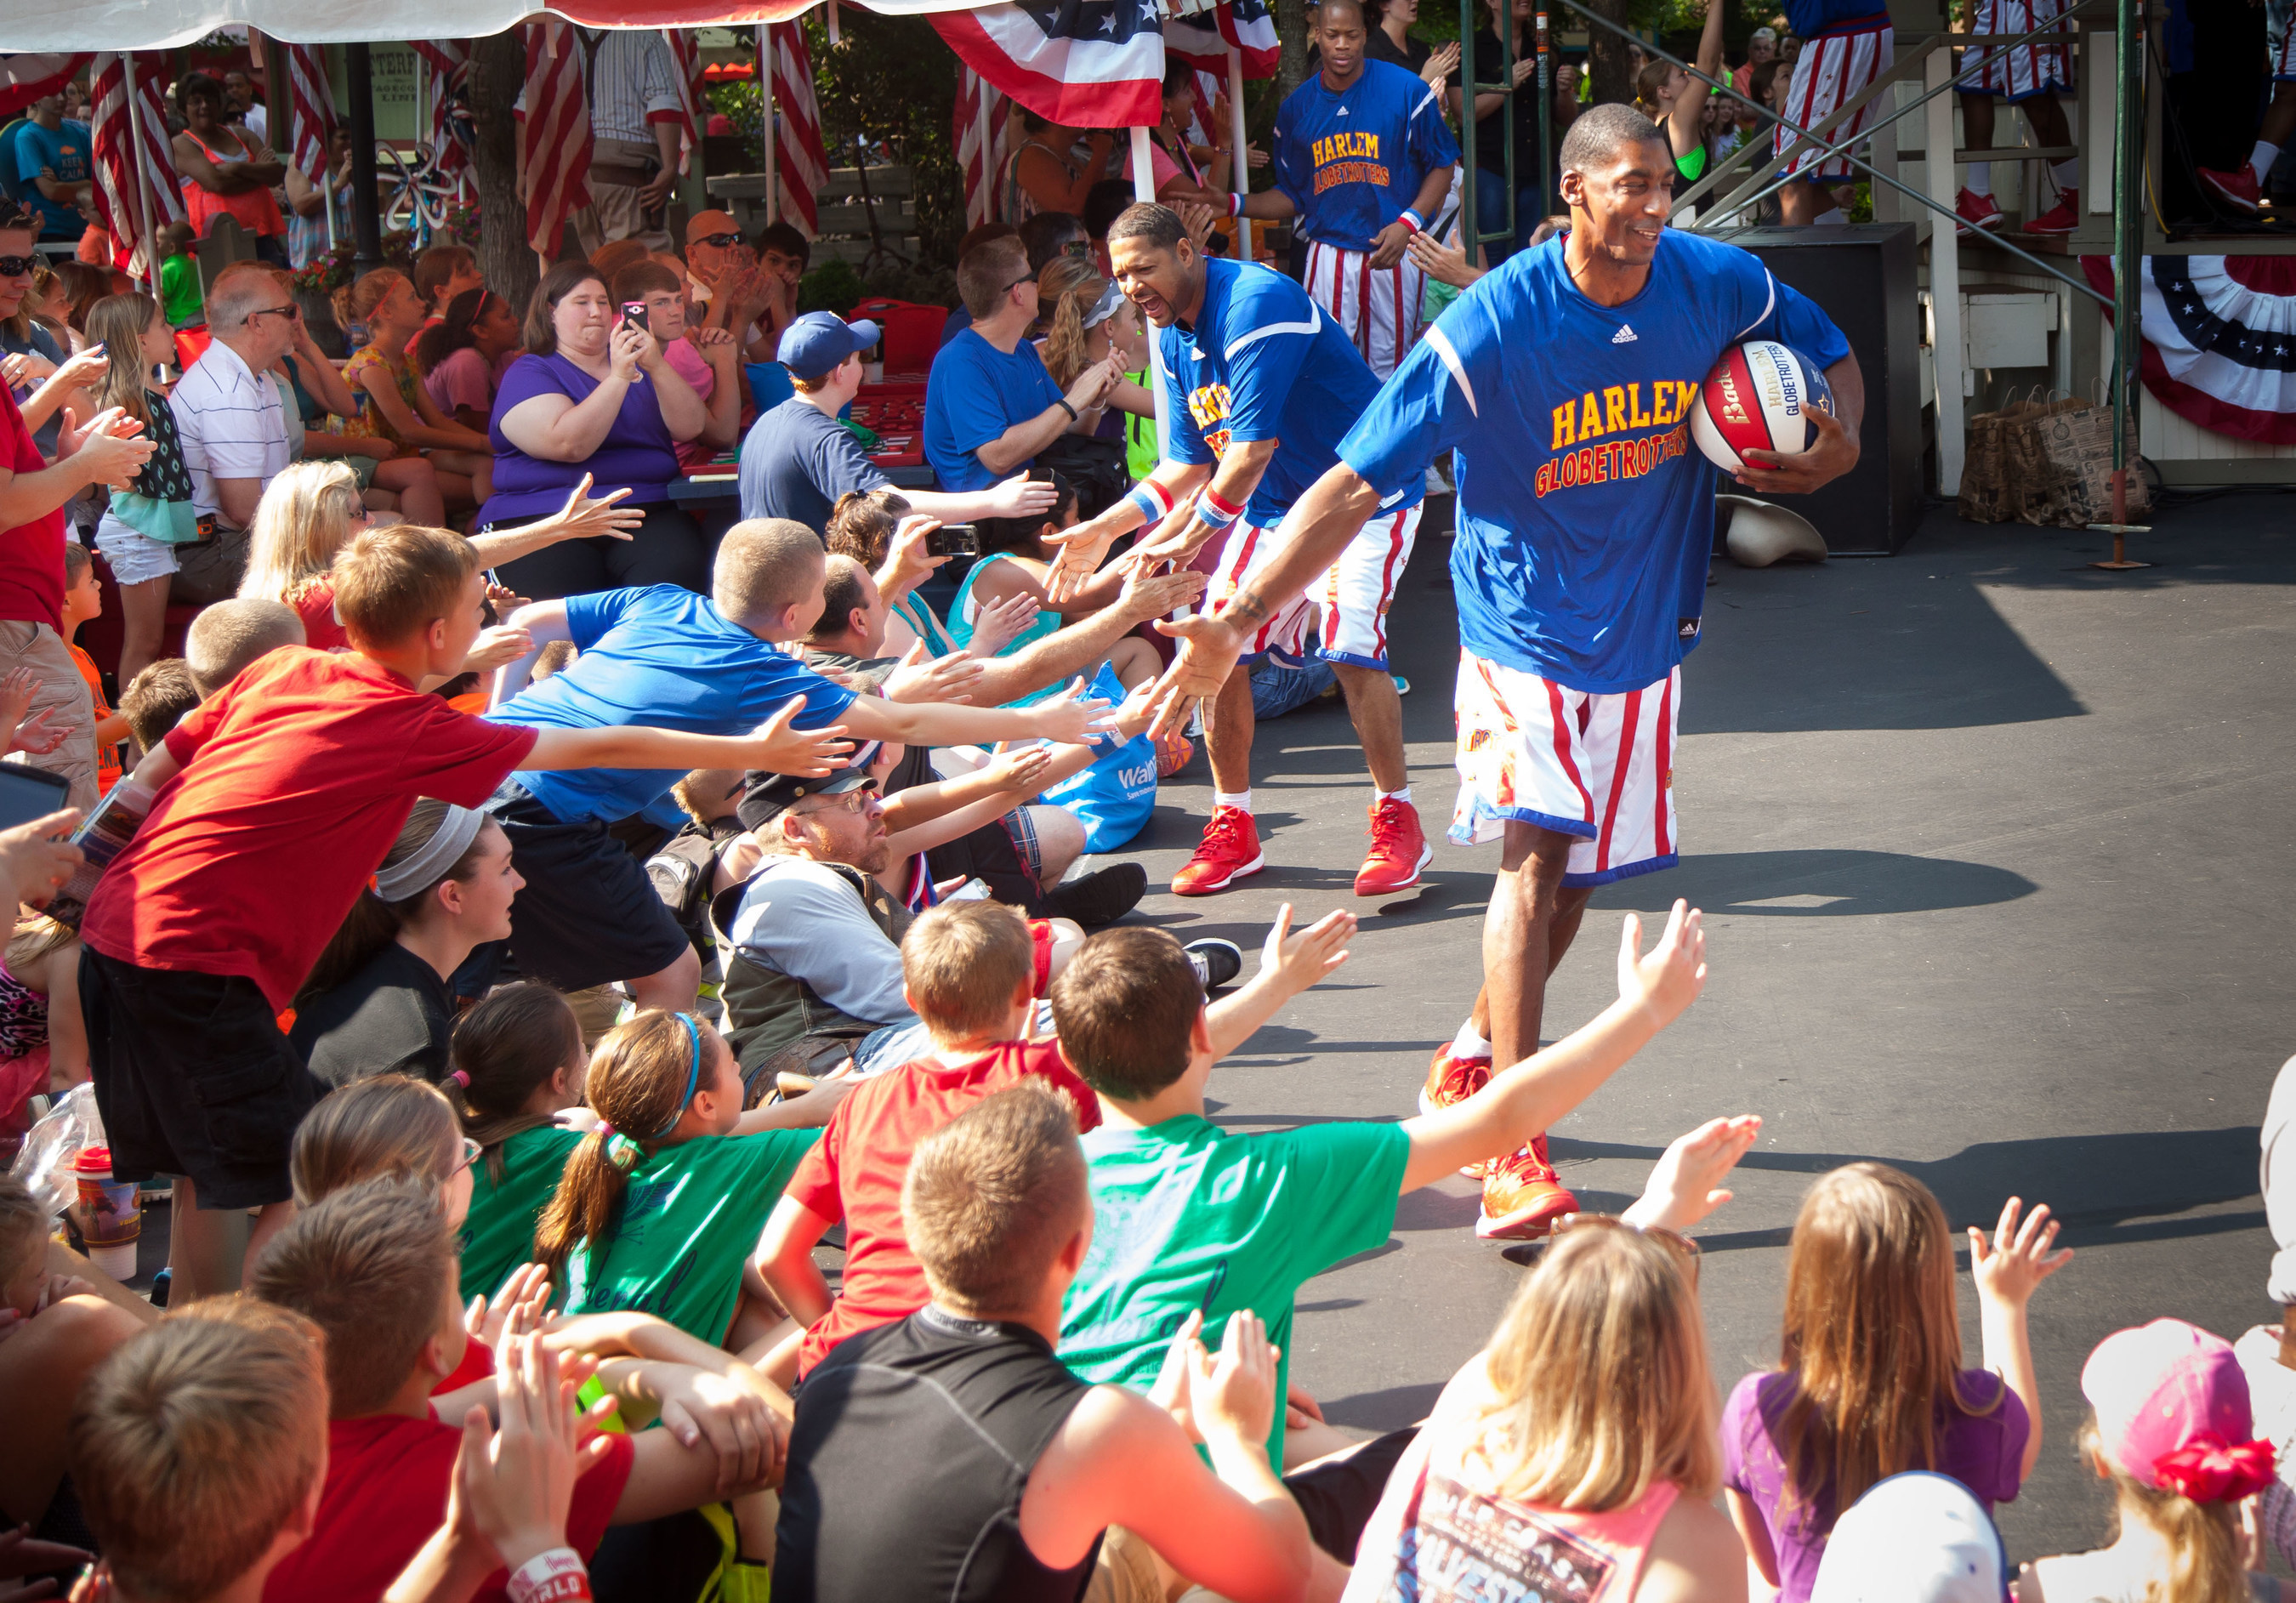 The Harlem Globetrotters tip off their first extended run ever with an opening ceremony June 6 at Silver Dollar City in Branson, Missouri.